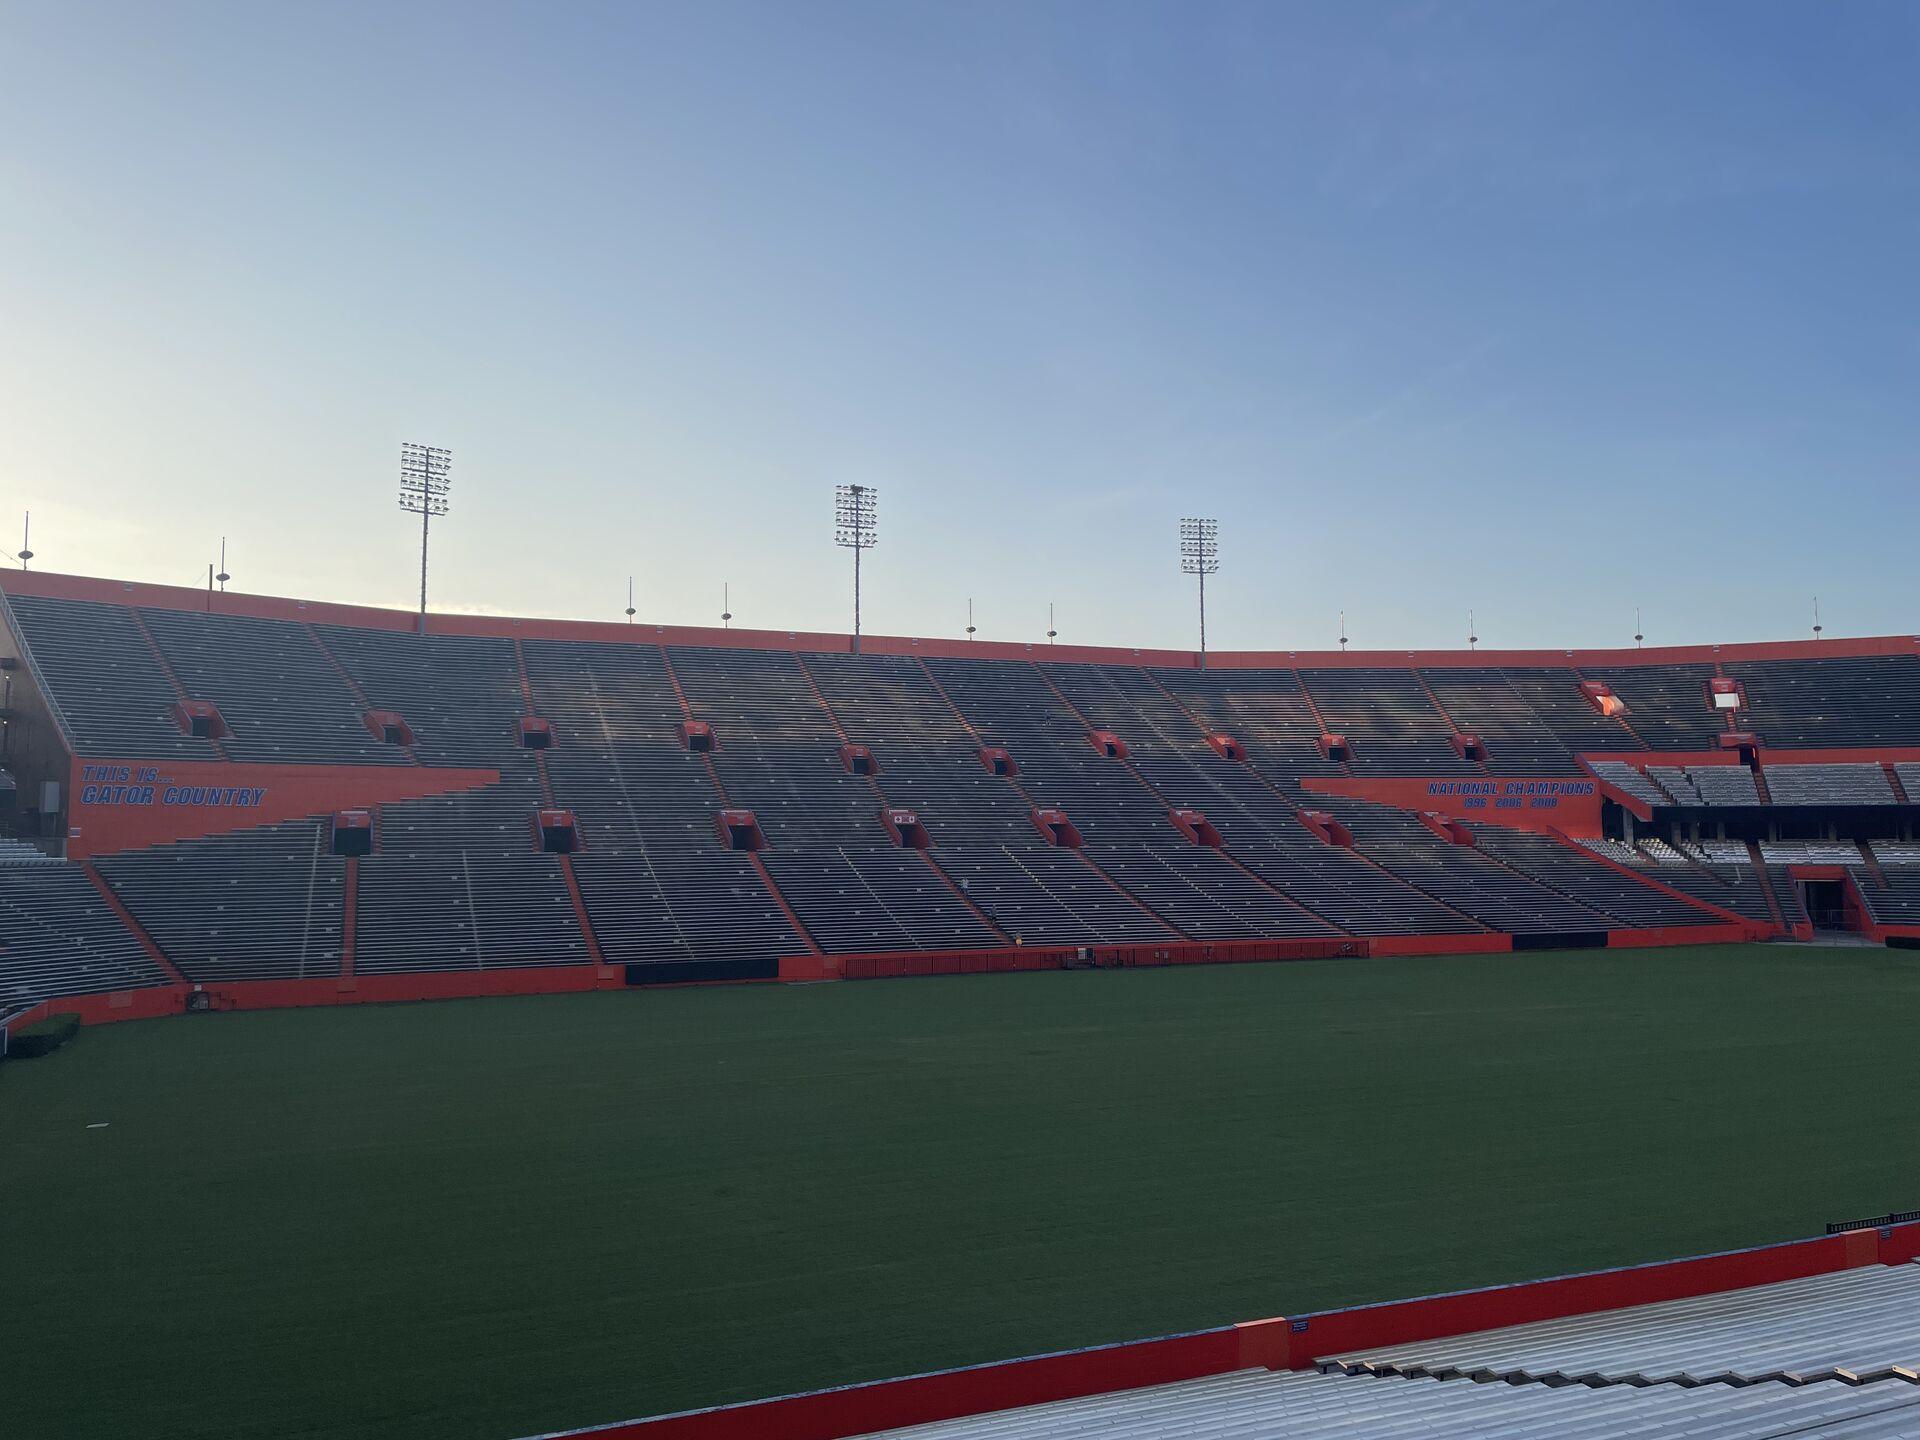 Sunrise over the blue-and-orange grandstands at the Ben Hill Griffin Stadium in Gainesville, FL